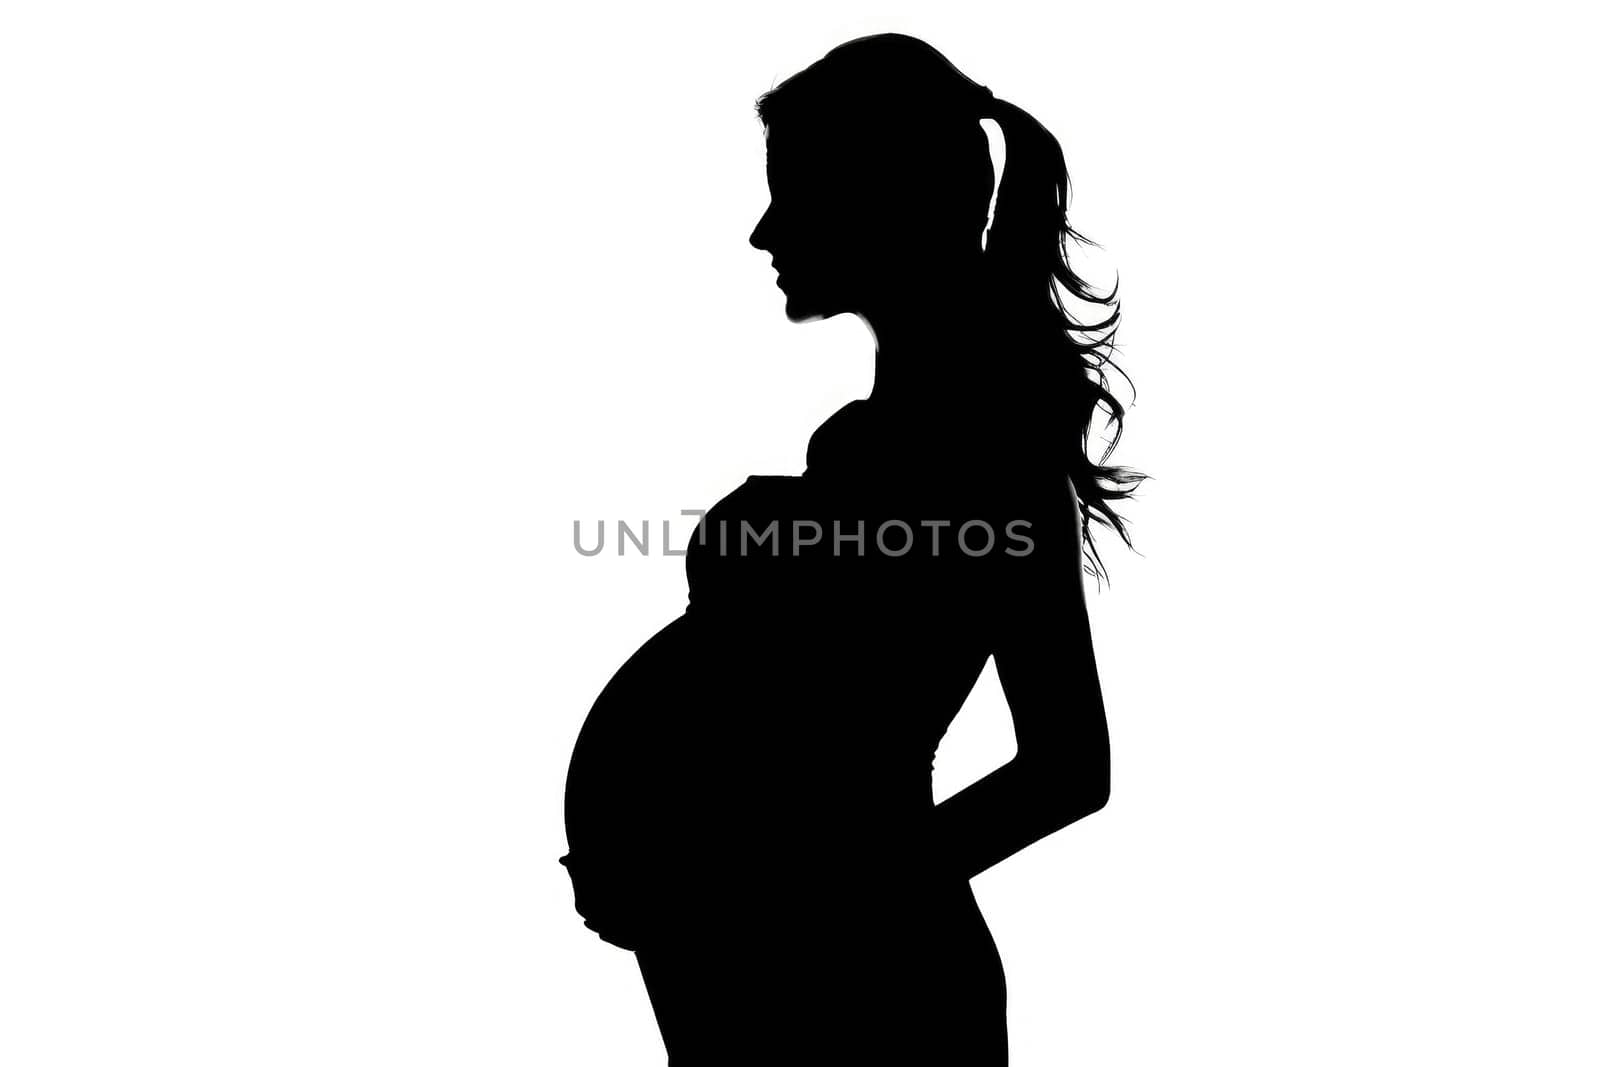 A black silhouette of a pregnant woman